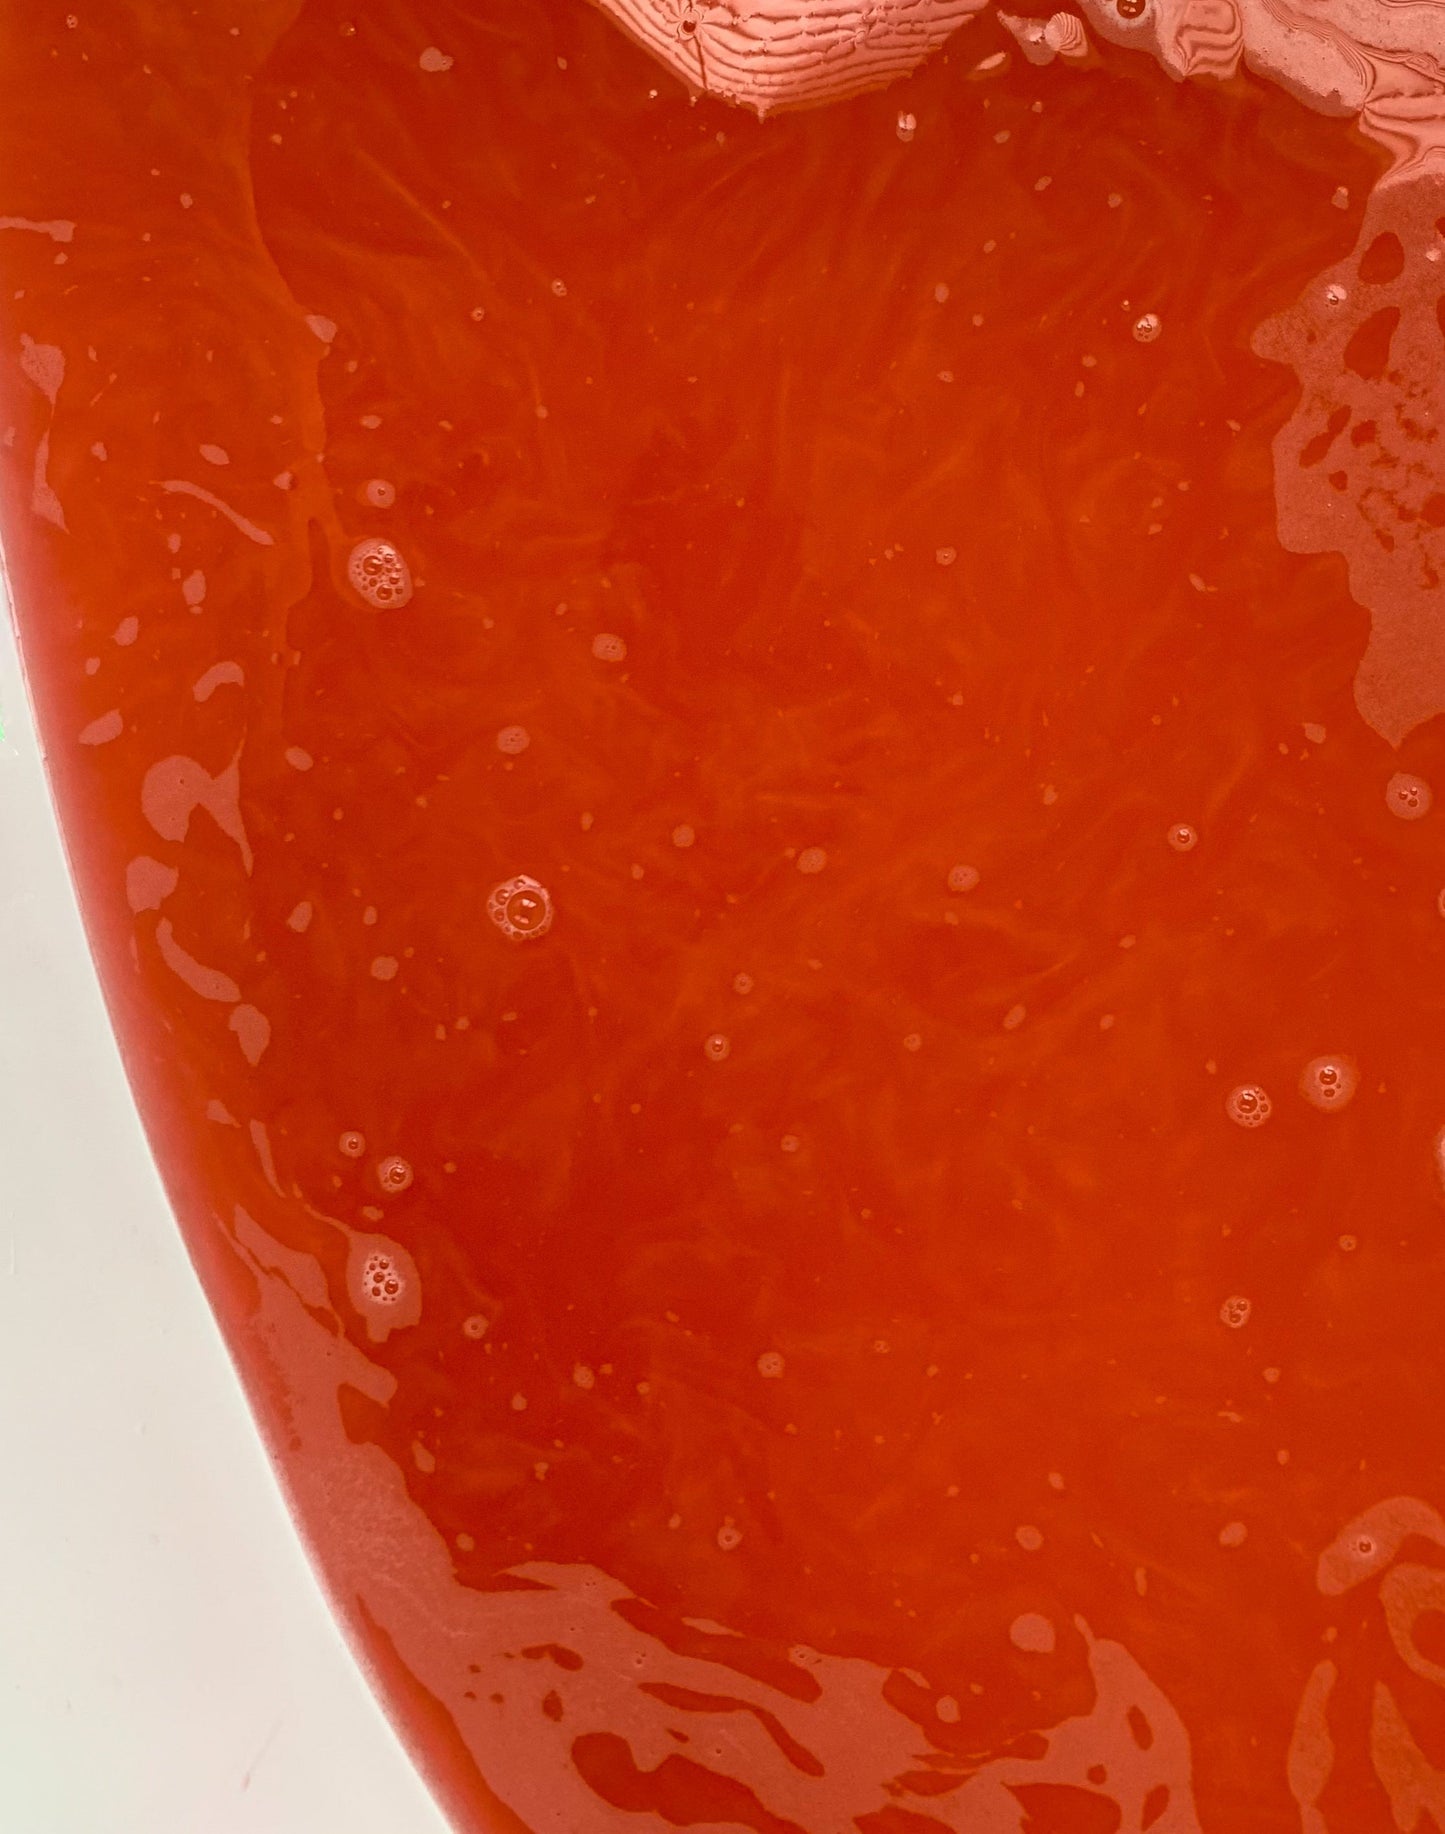 Close up of red bath water with mica shimmer